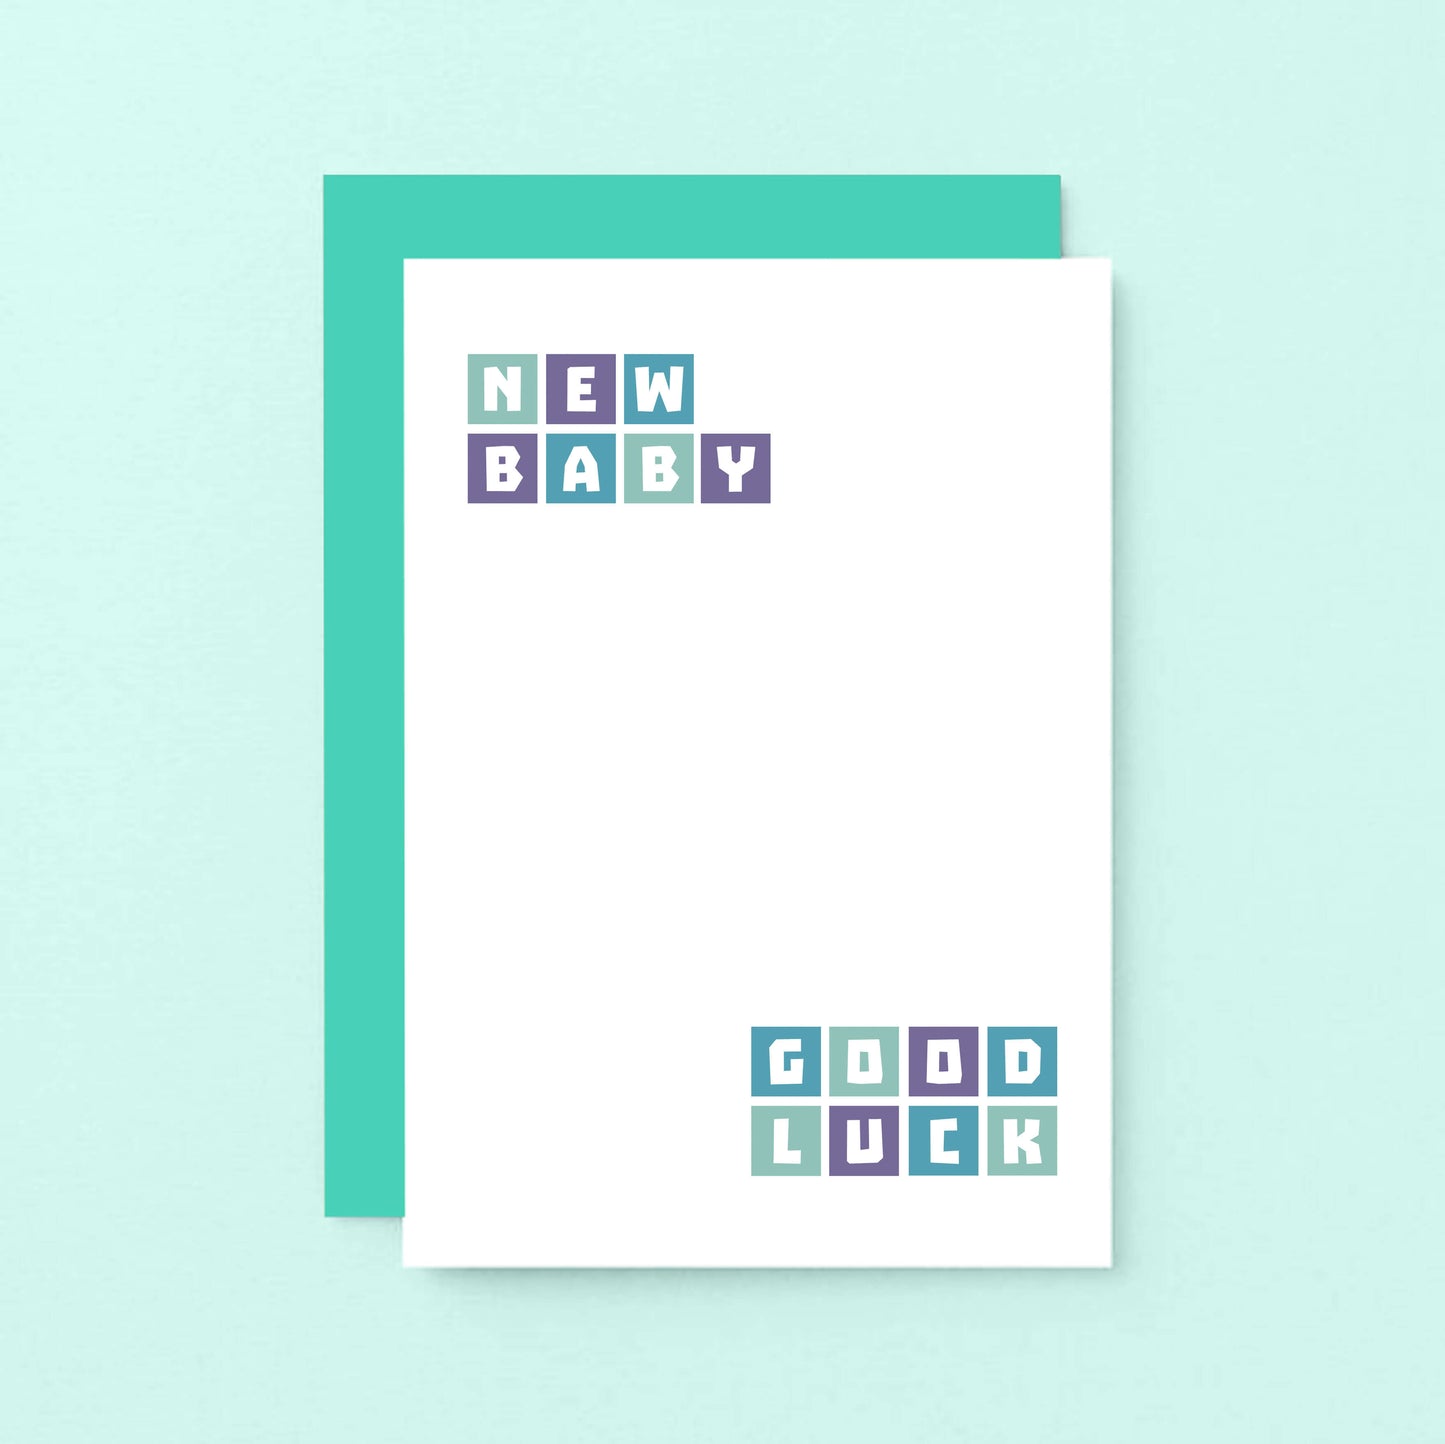 New Baby Card by SixElevenCreations. Reads New baby Good luck. Product Code SE0243A6